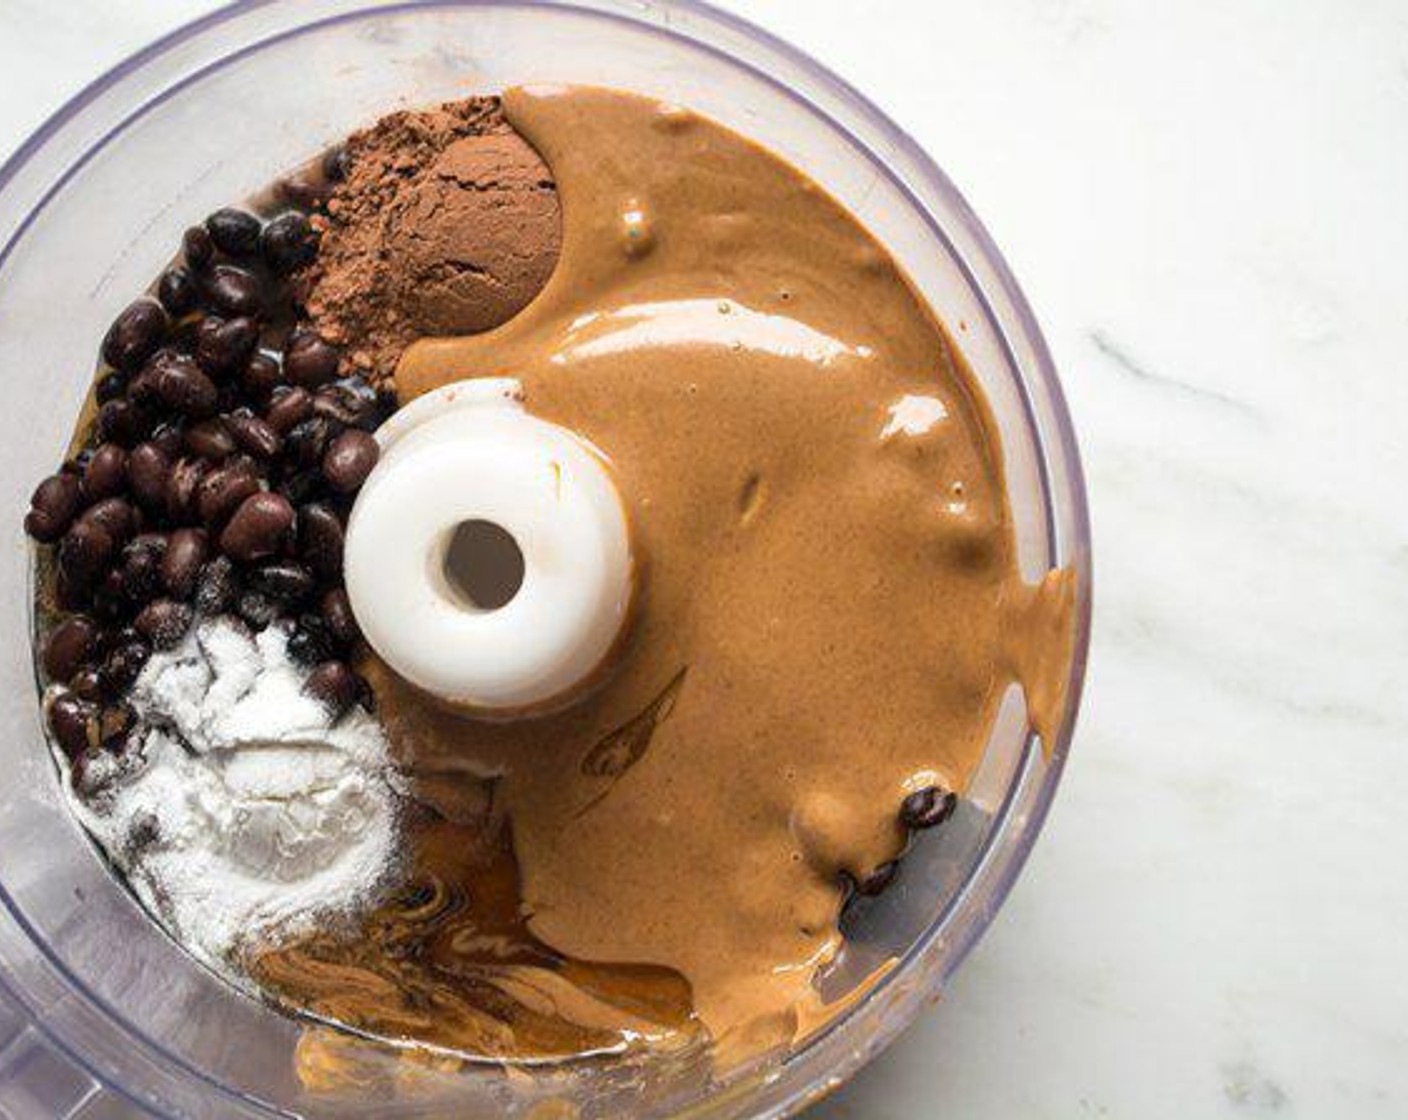 step 2 Combine Canned Black Beans (2 1/3 cups), Unsweetened Cocoa Powder (2 Tbsp), Vanilla Extract (1 Tbsp), Peanut Butter (2/3 cup), Honey (1/3 cup), and Baking Powder (1 tsp) in the container of a food processor. Process mixture until very smooth.